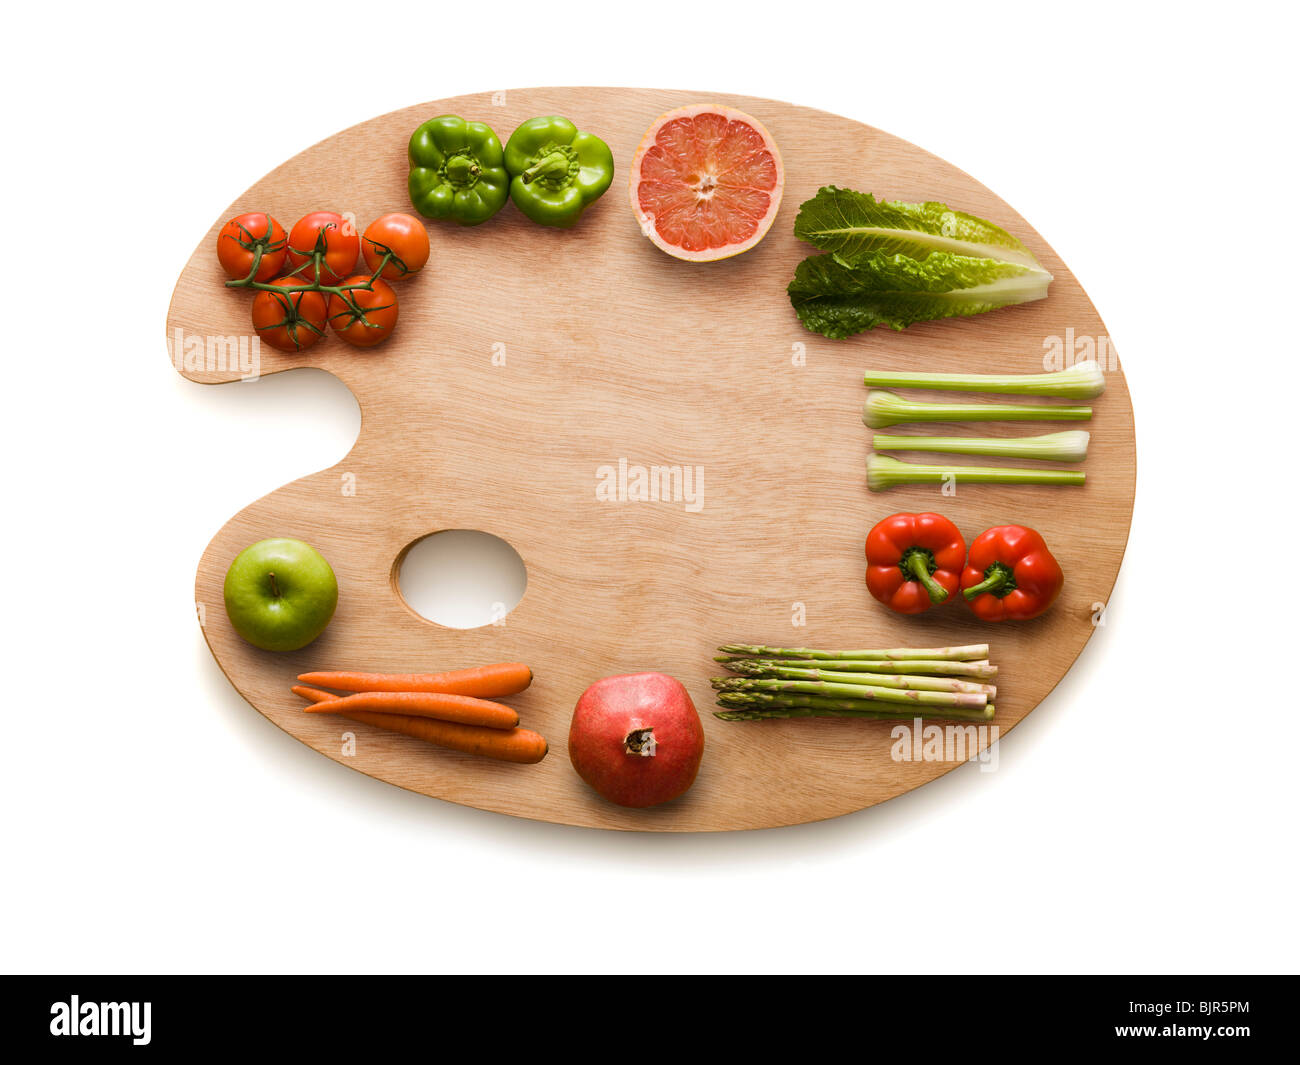 palette with fruits and vegetables on it Stock Photo